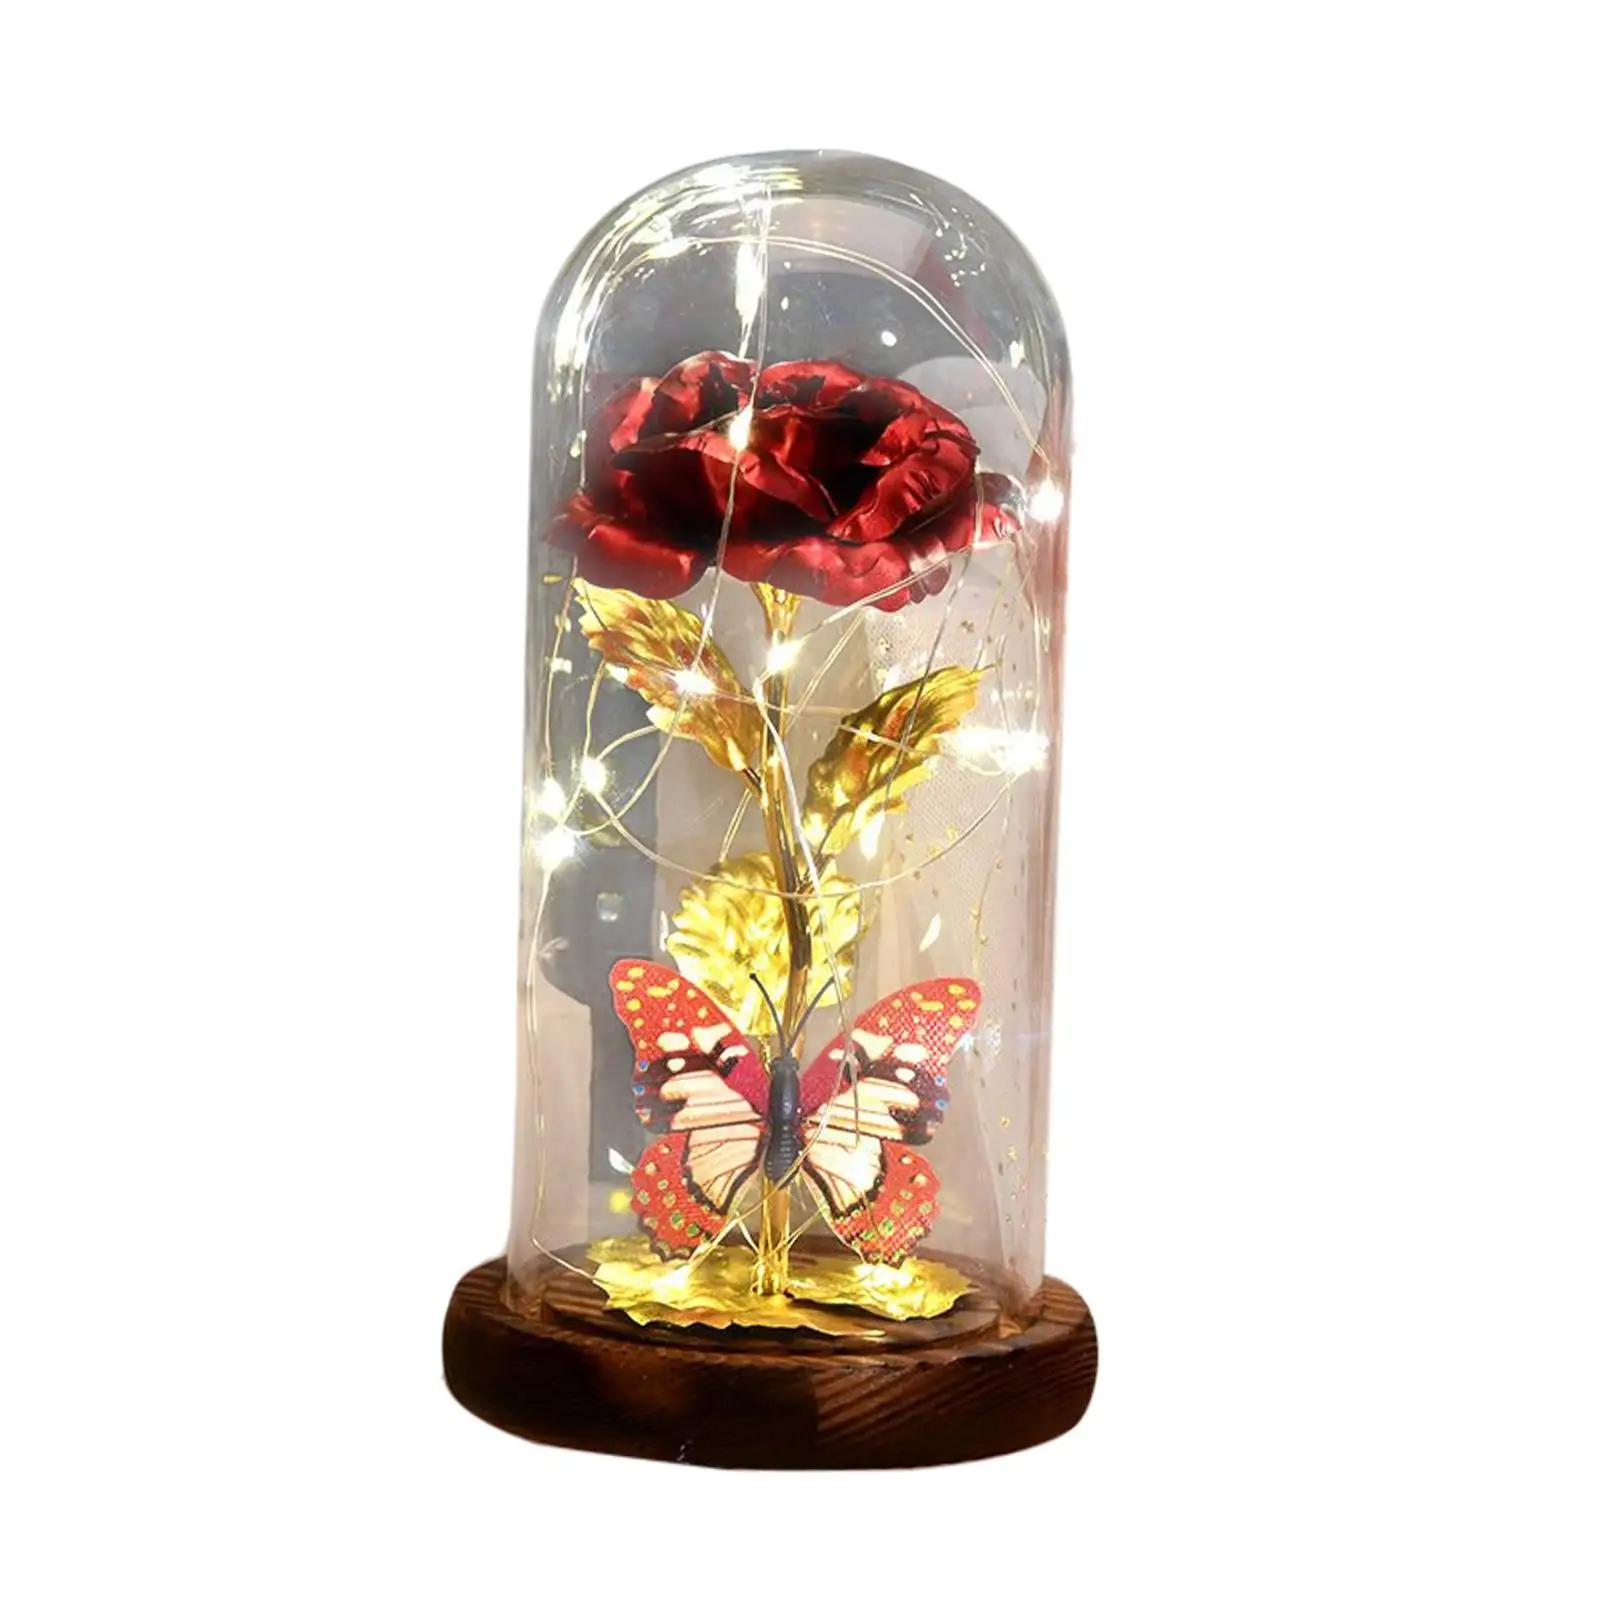 Rose Flower Ornaments Atmosphere Lamp Crafts Decorative LED Night Light for Bedroom Wedding Tabletop Fireplace Decorations